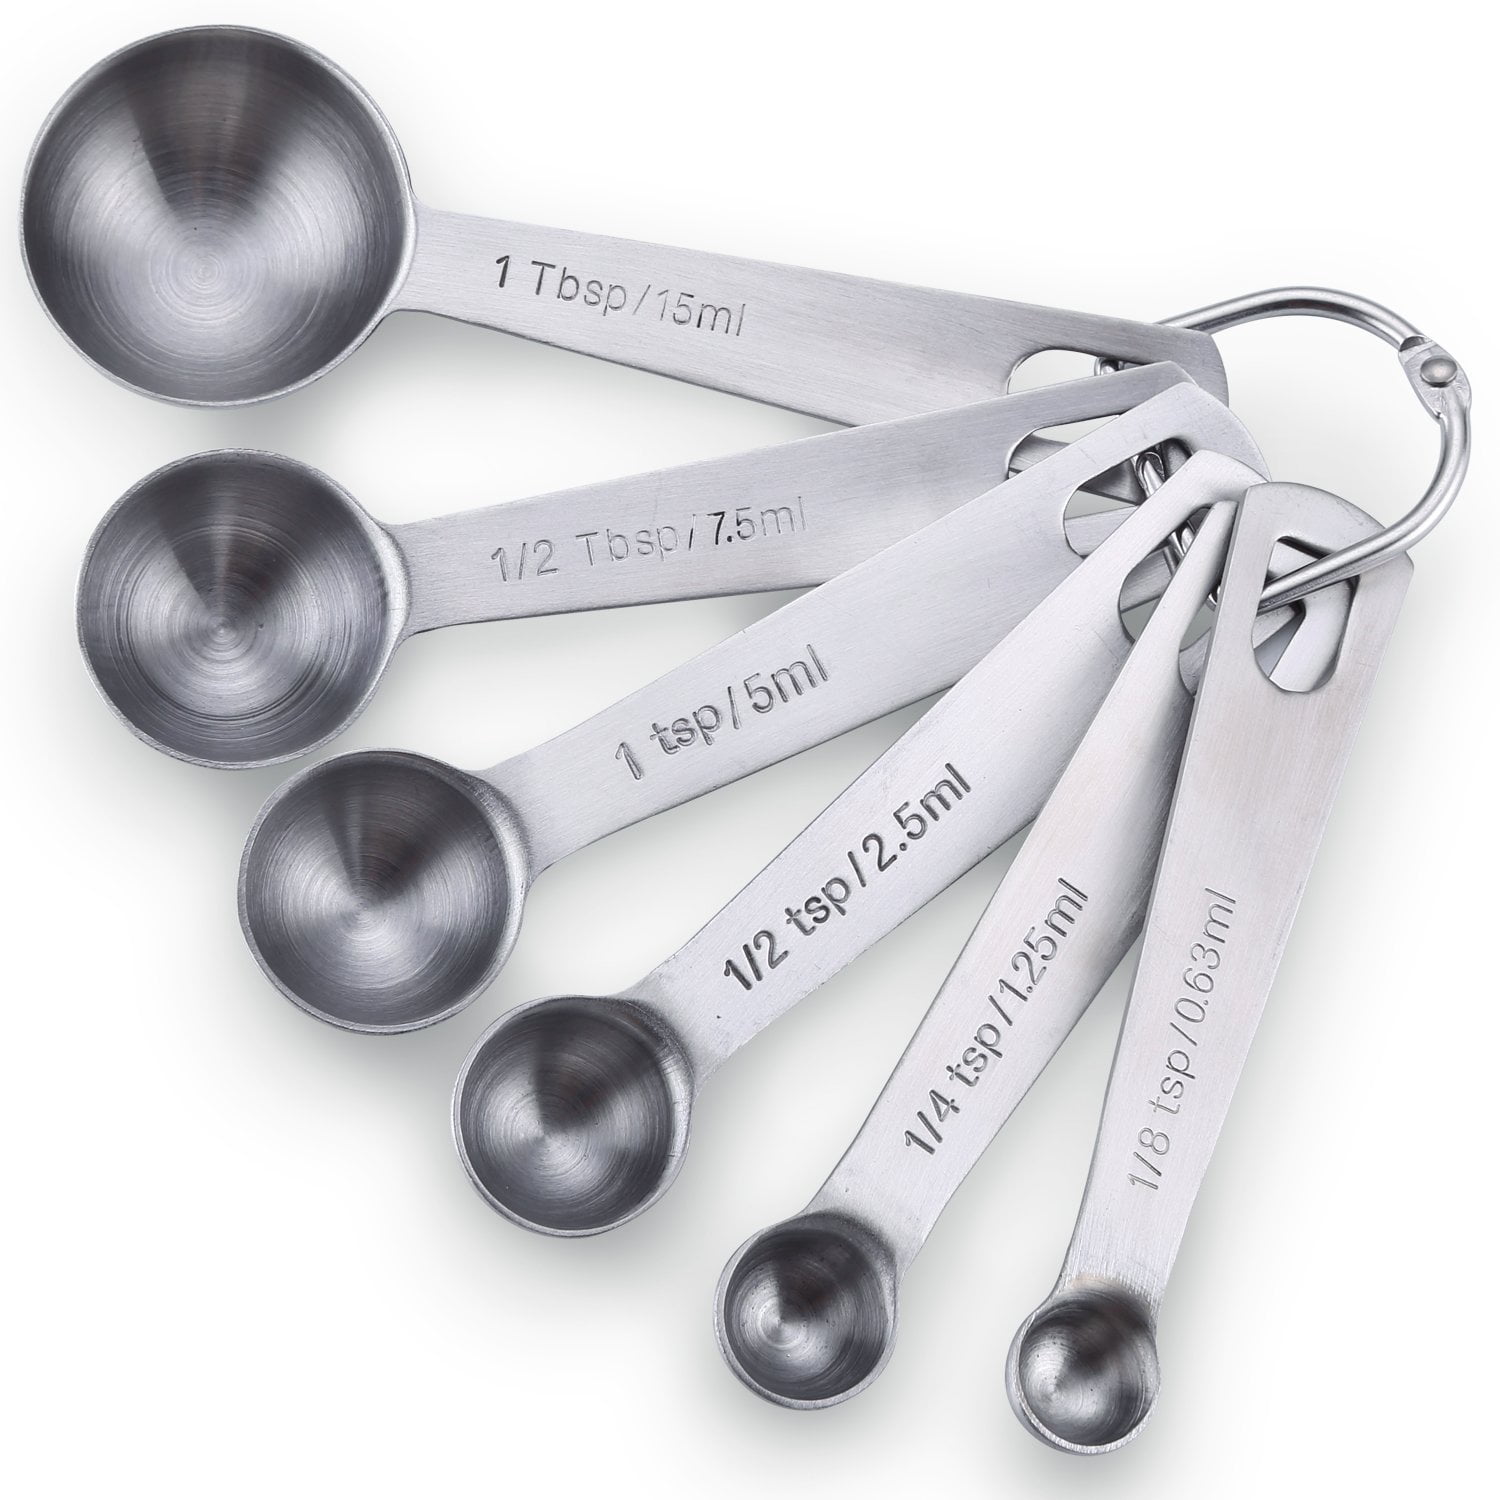 New KitchenAid Stainless Steel Set of 8 Measuring Cups and Spoons 